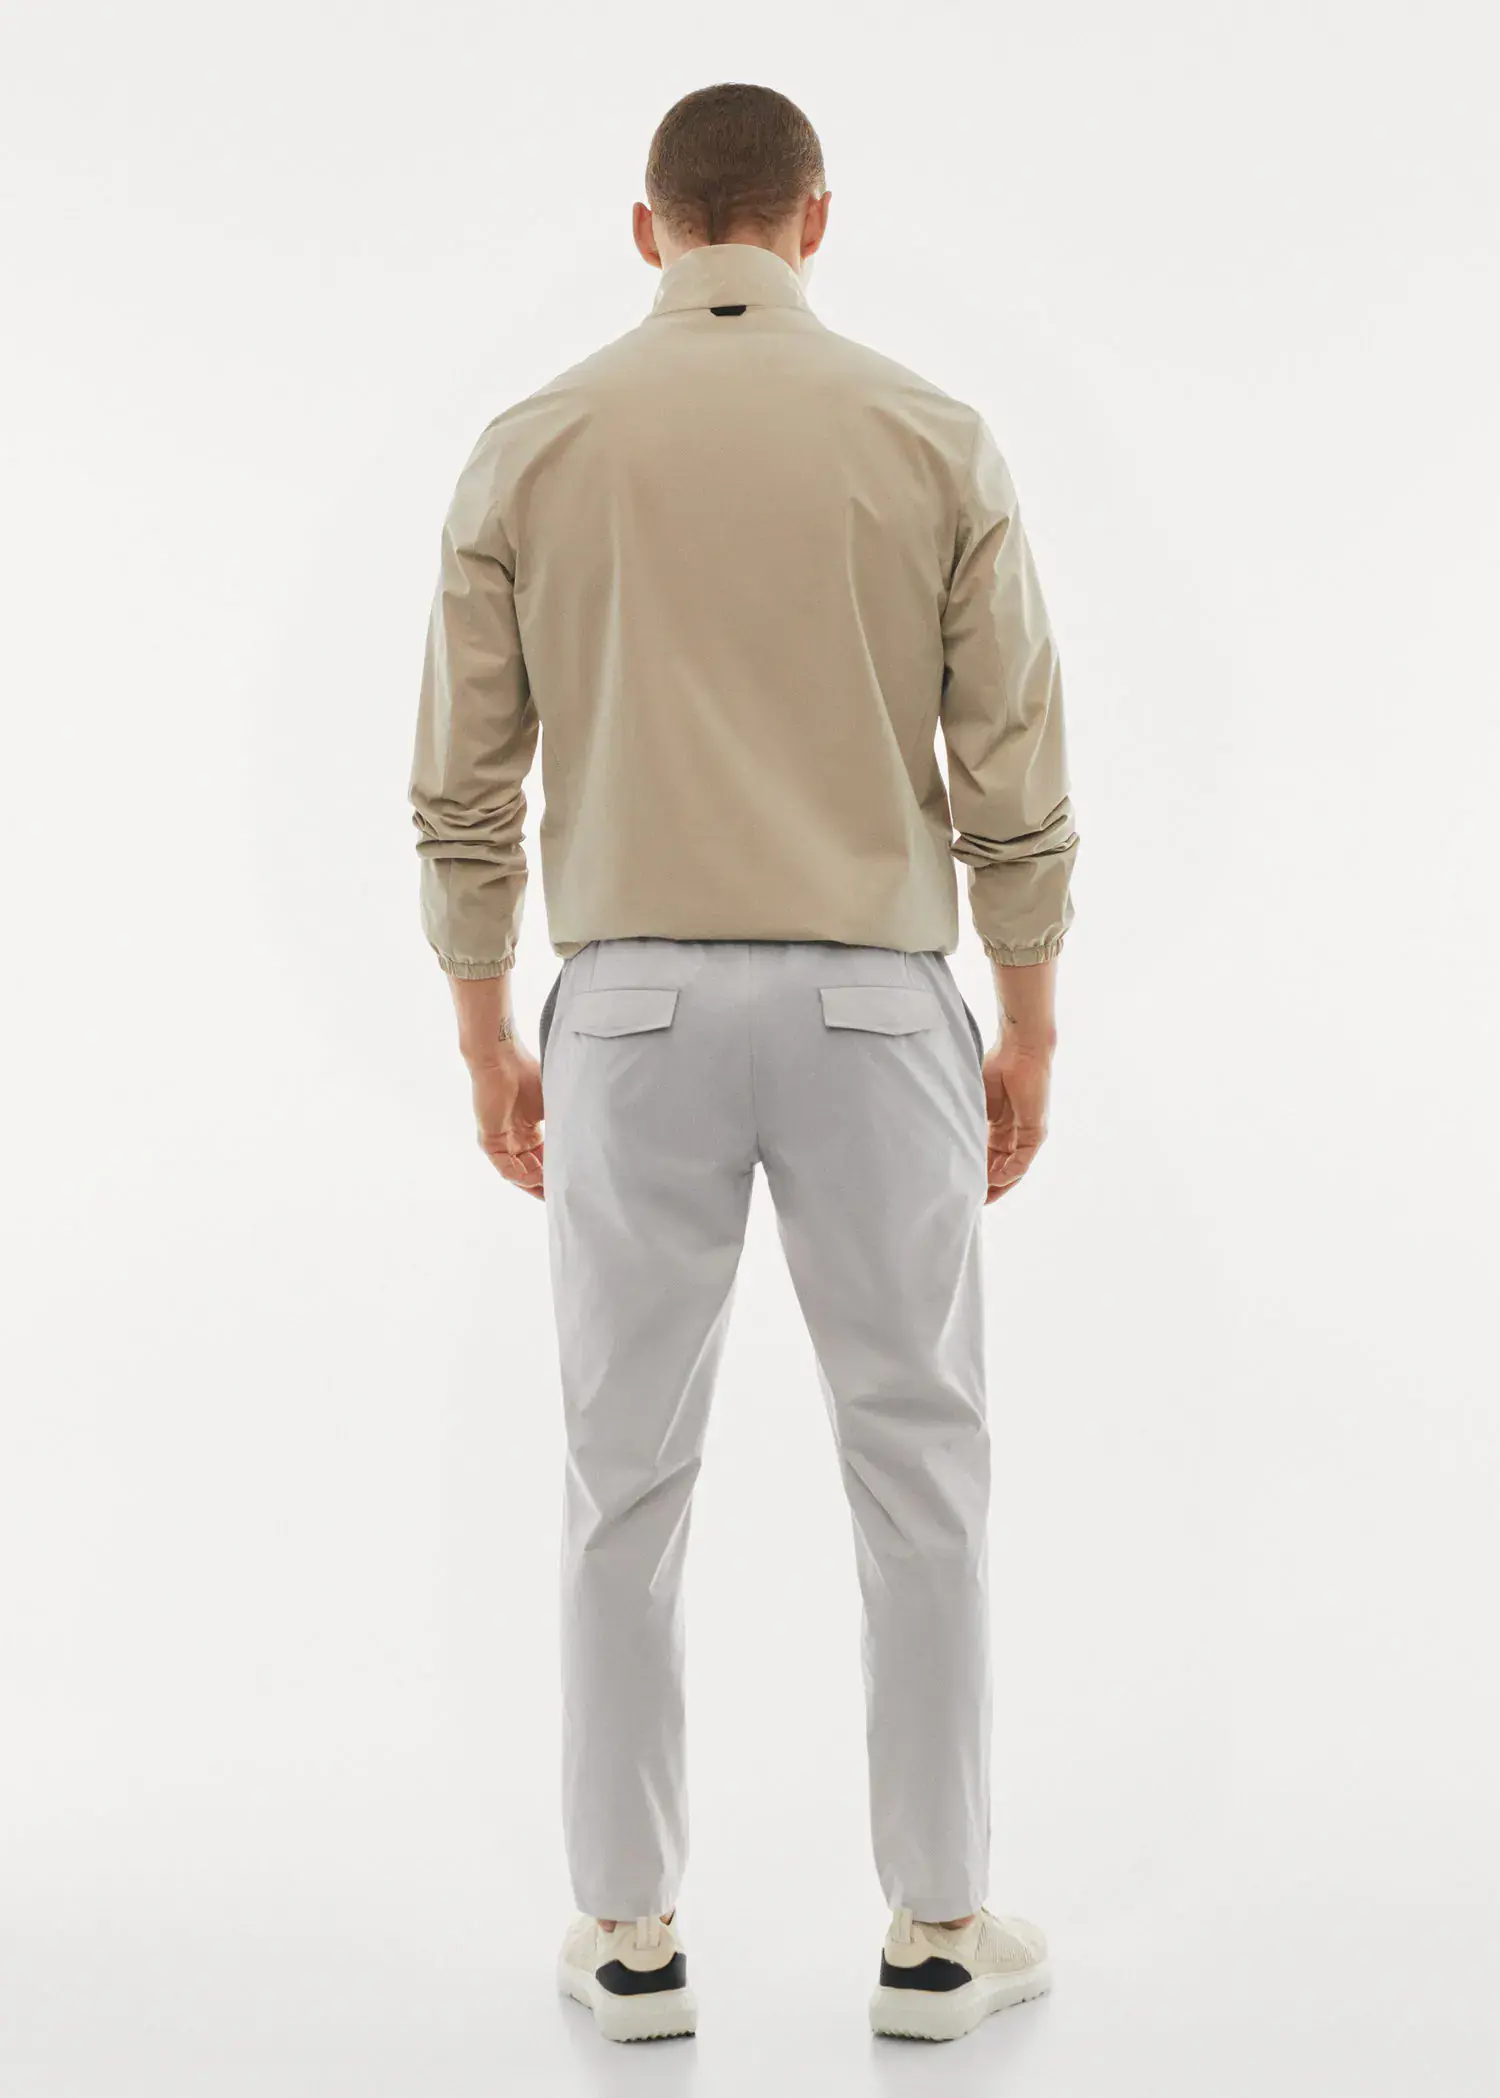 Mango Water-repellent technical pants. a man in a tan jacket and white pants. 